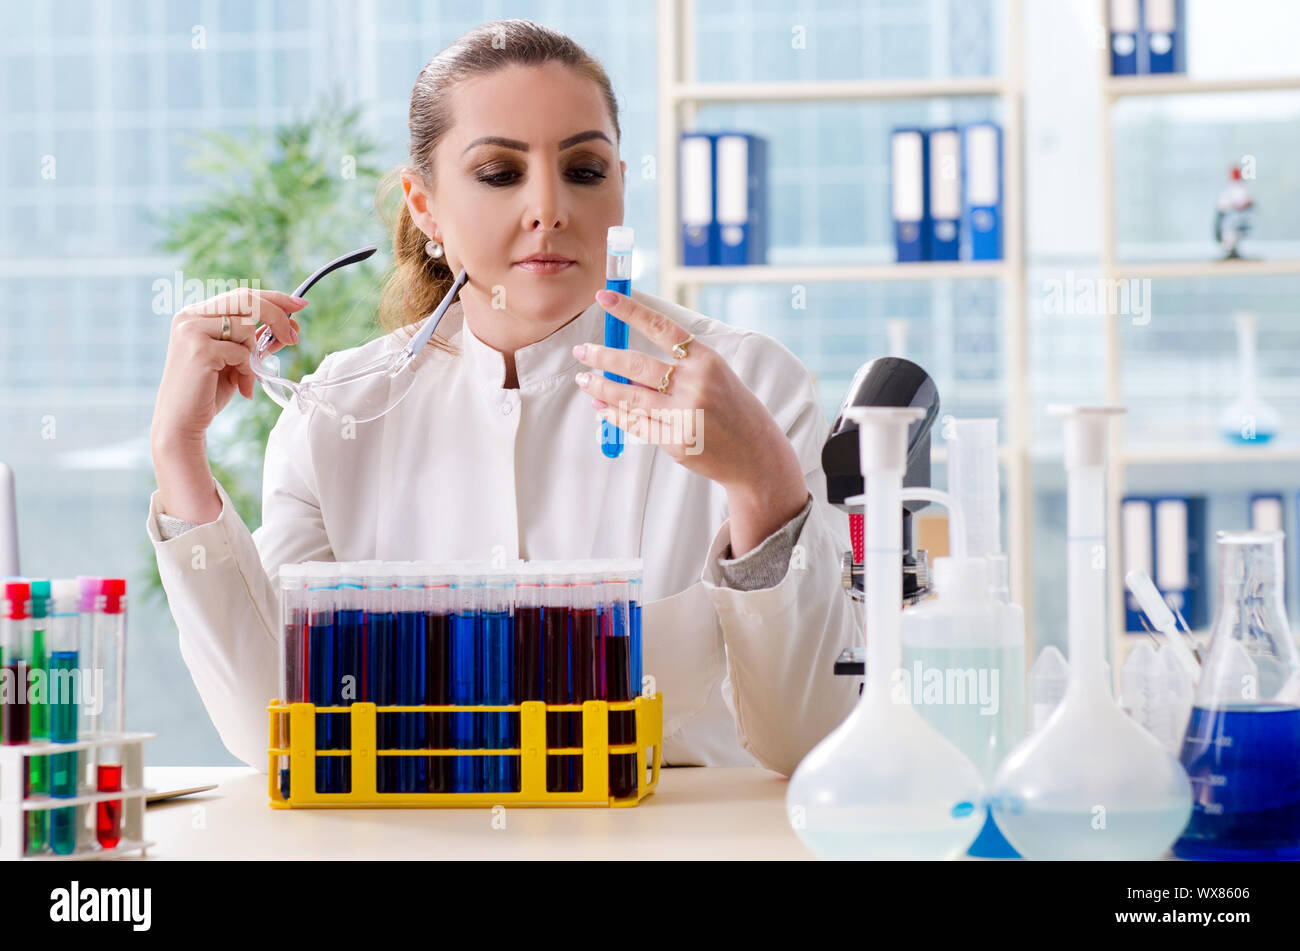 Female chemist working in medical lab Stock Photo